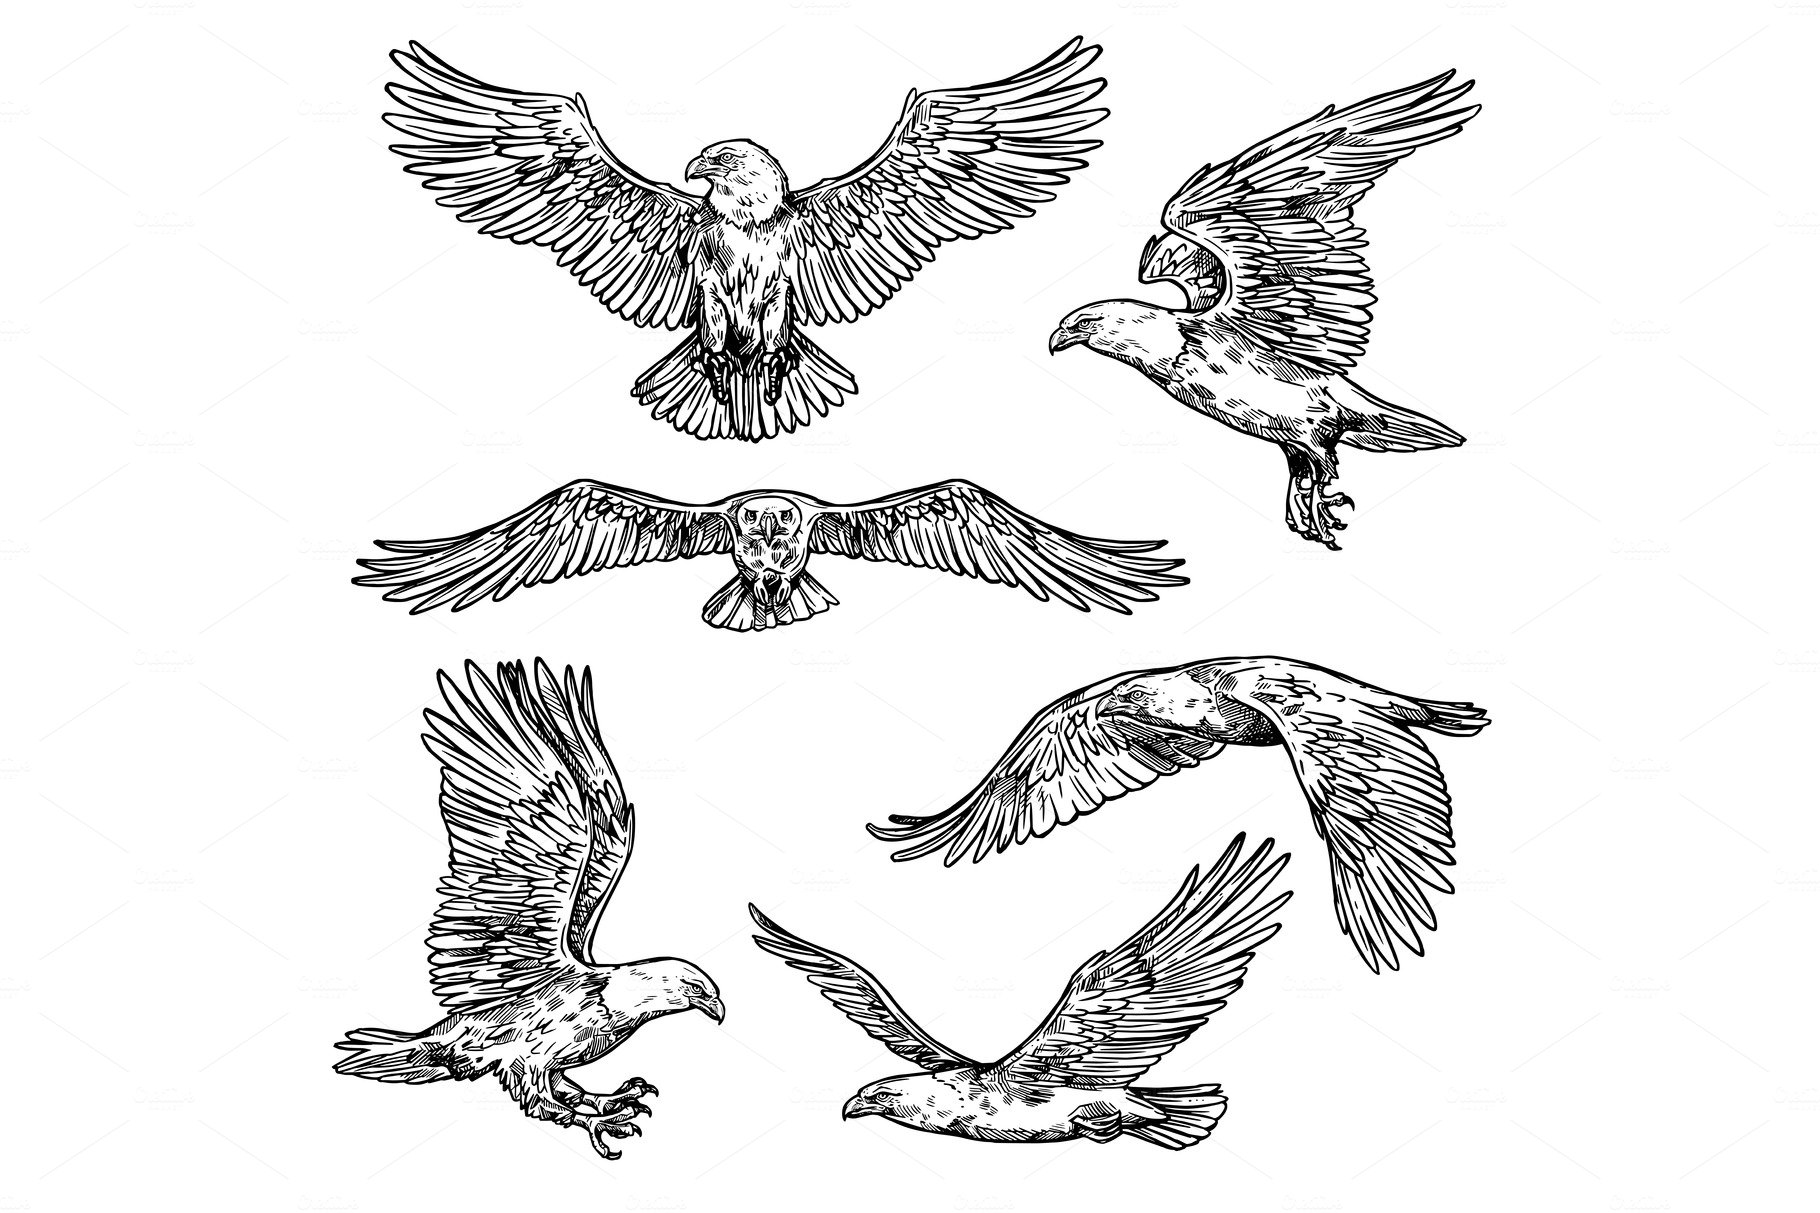 Hawk or eagle sketch, flying falcon cover image.